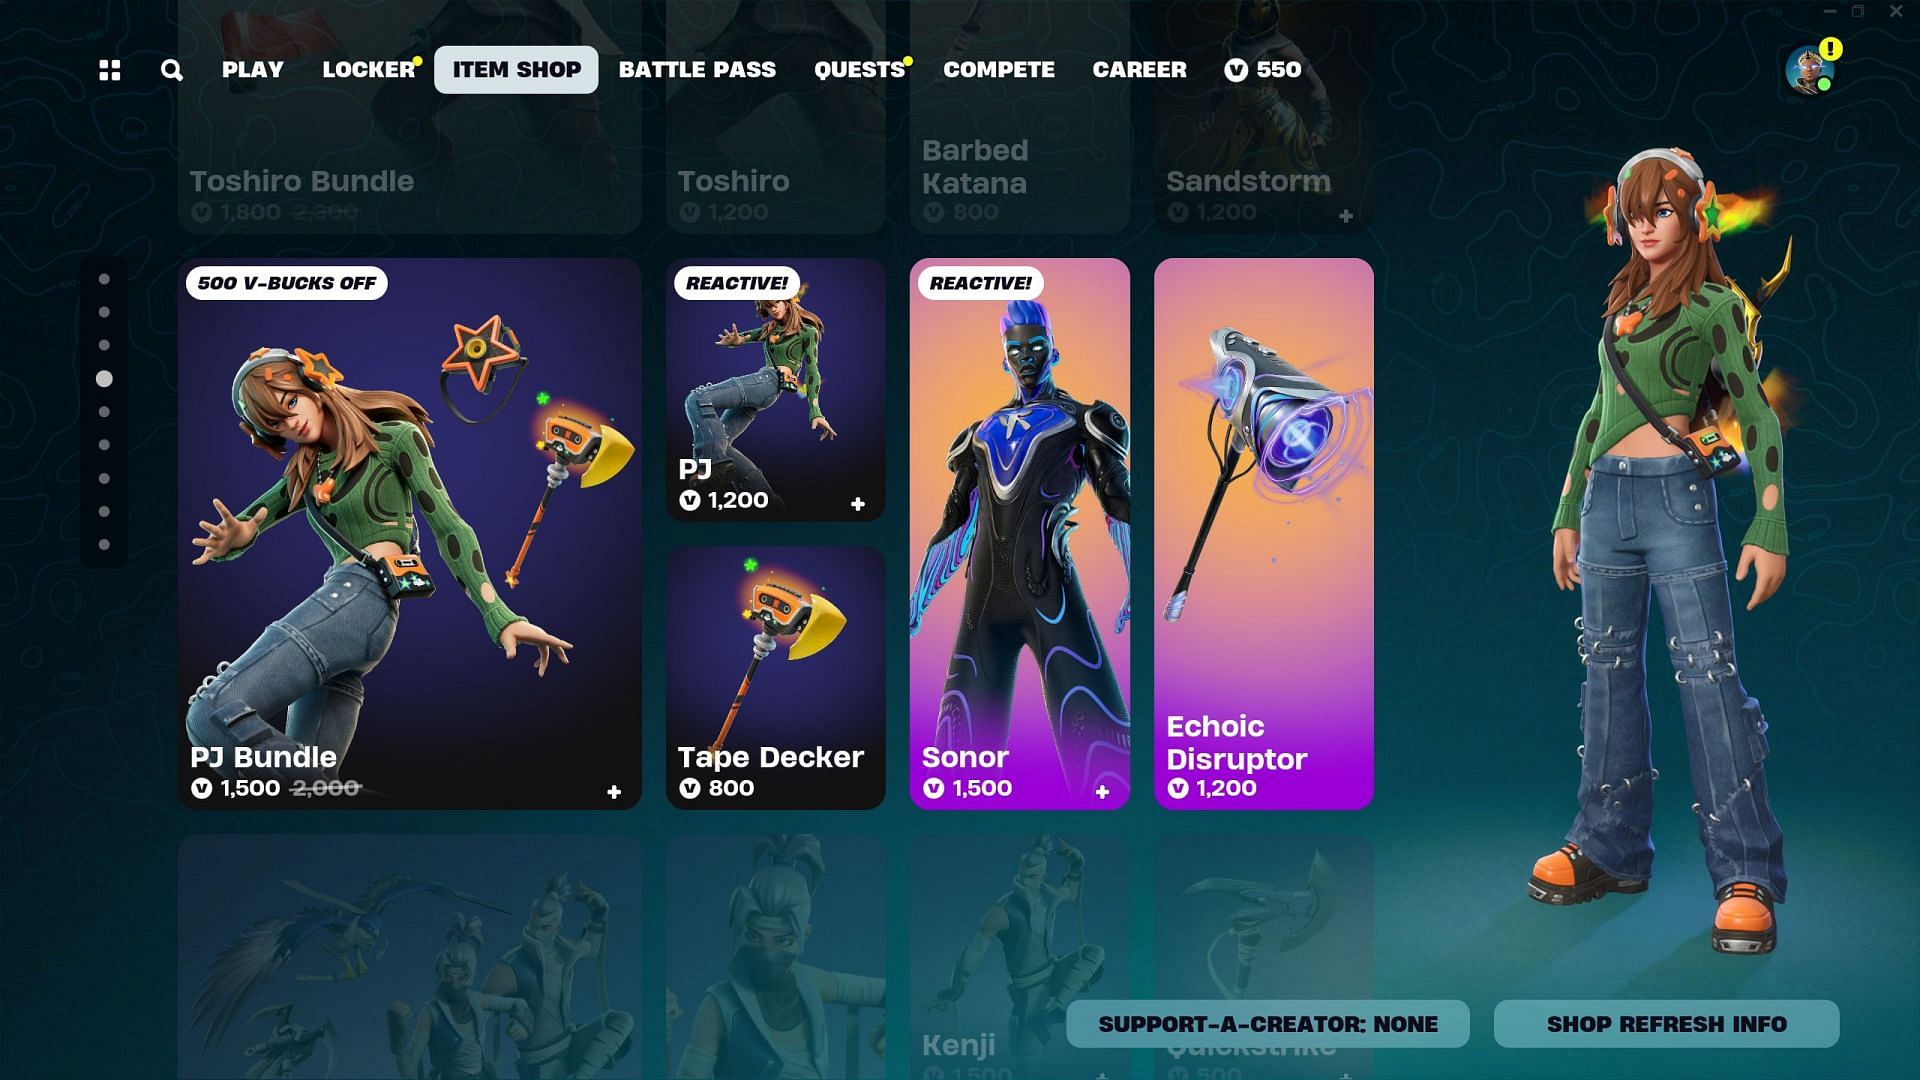 PJ Skin is currently listed in the Item Shop (Image via Epic Games/Fortnite)